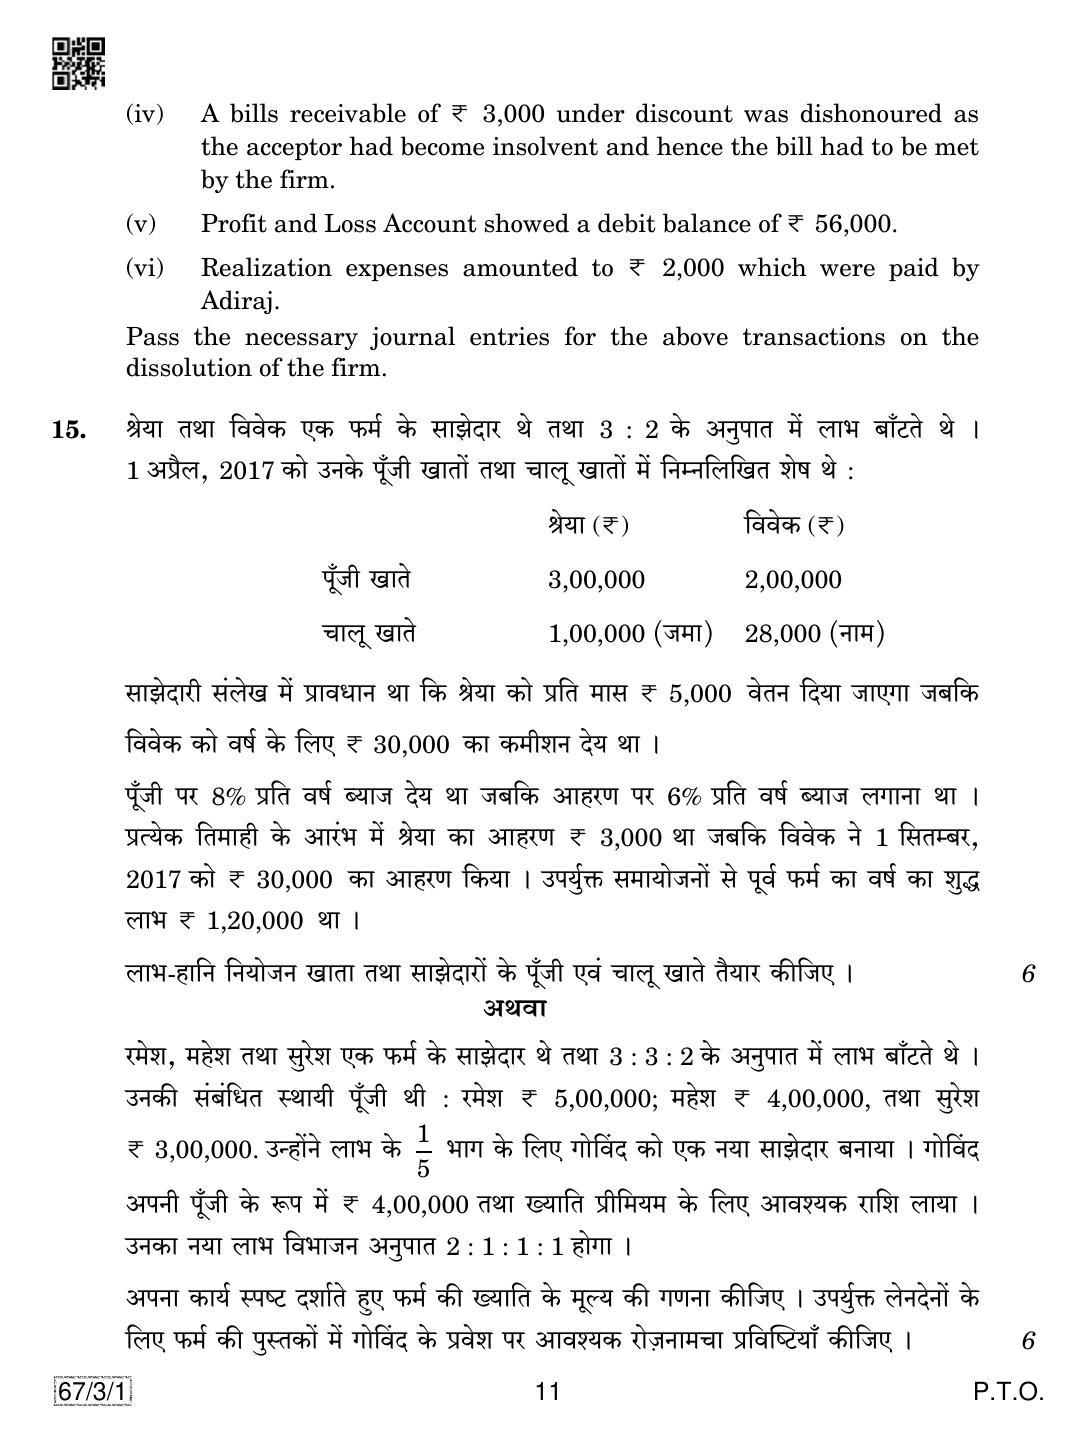 CBSE Class 12 67-3-1 Accountancy 2019 Question Paper - Page 11